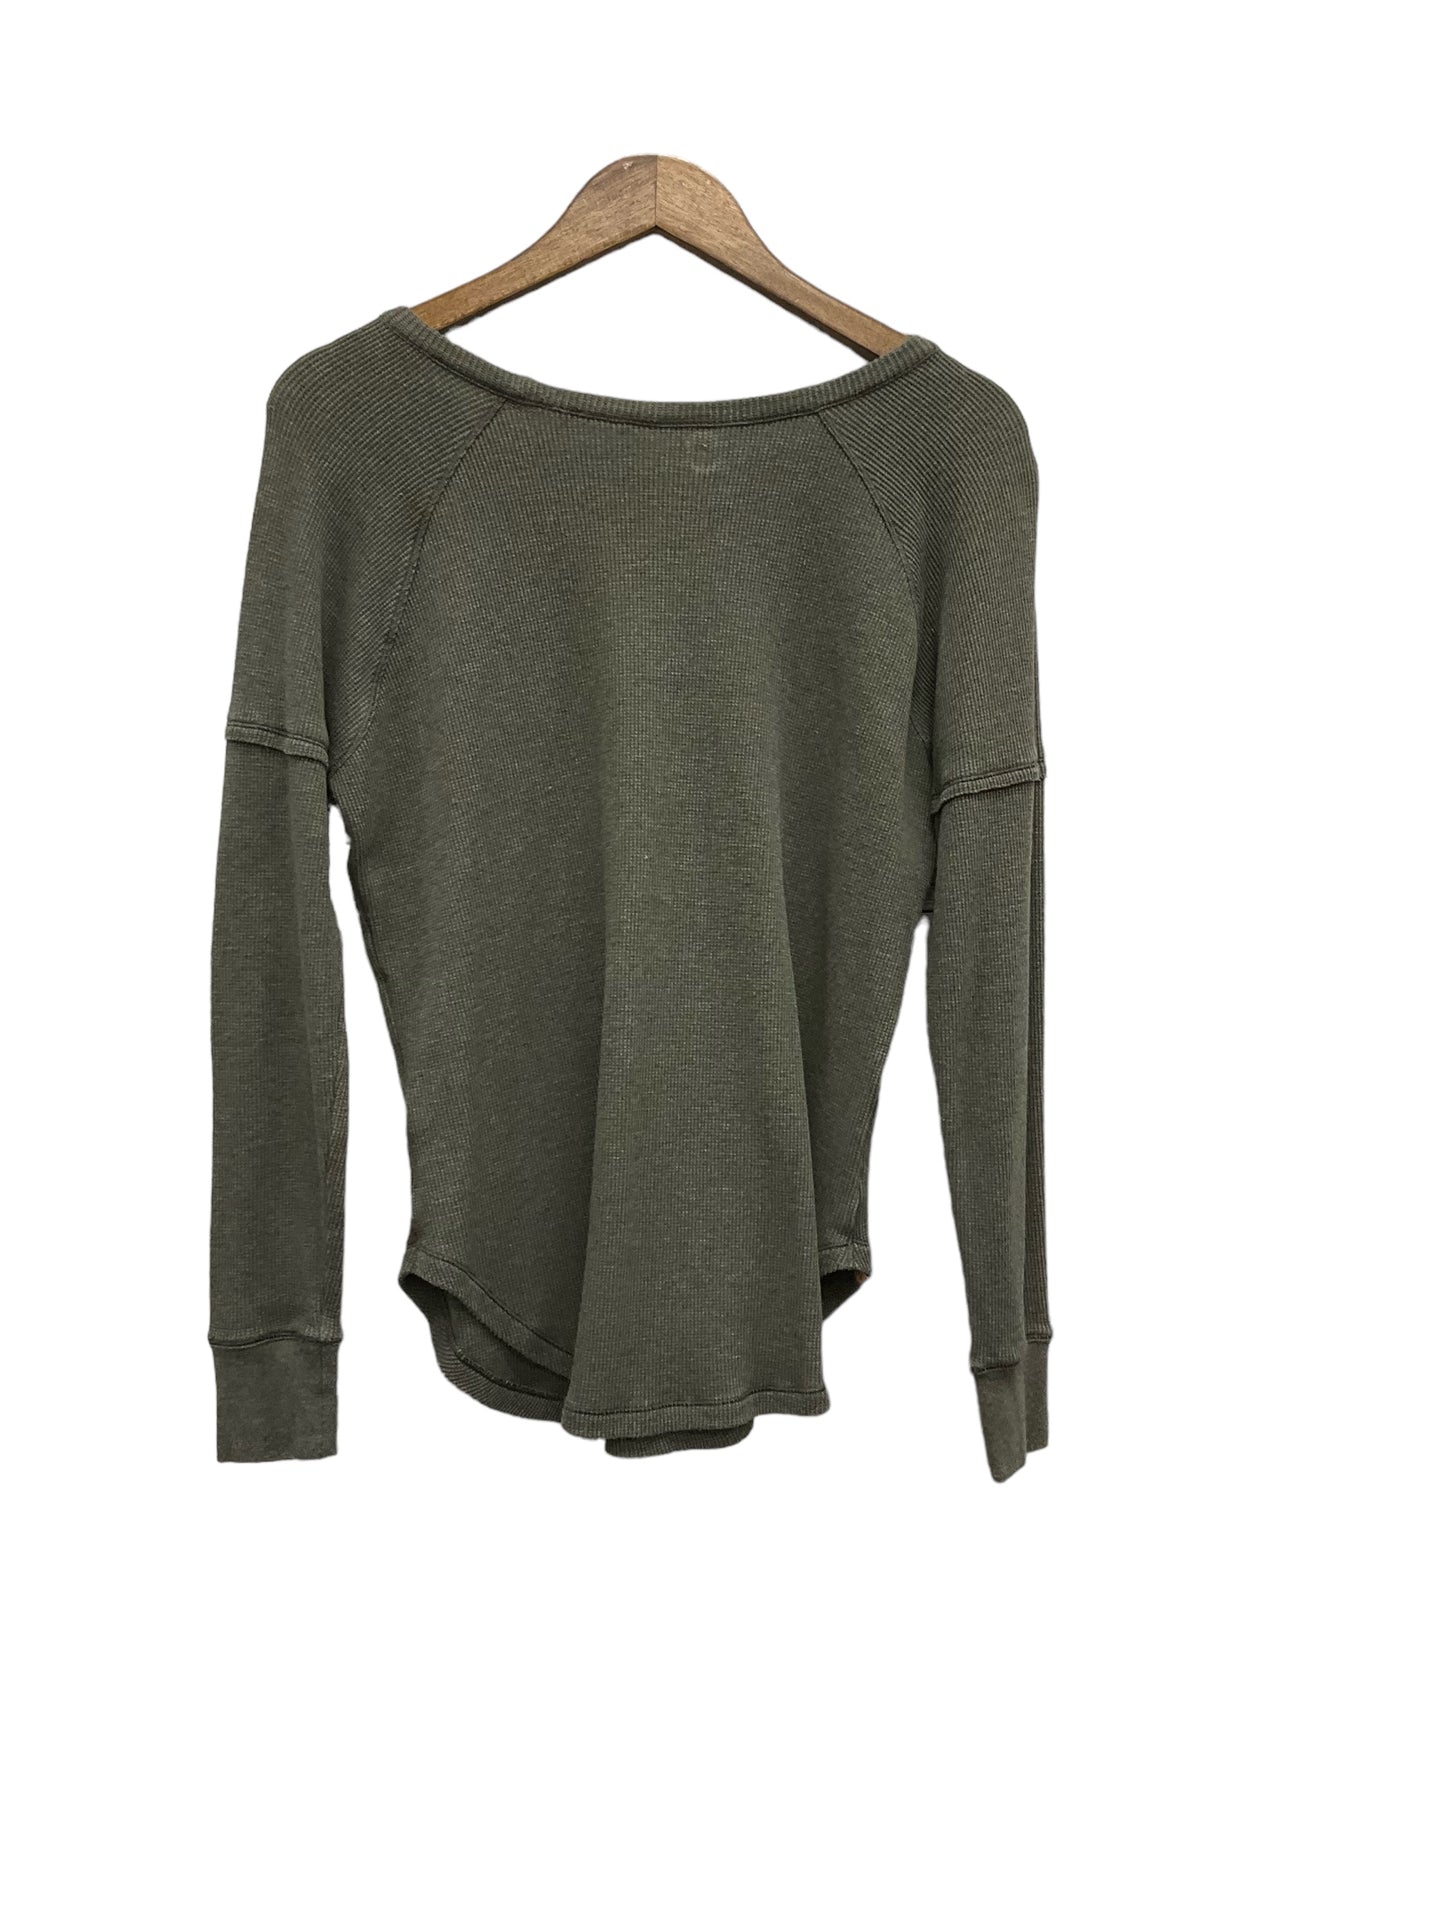 Top Long Sleeve Basic By Clothes Mentor  Size: S